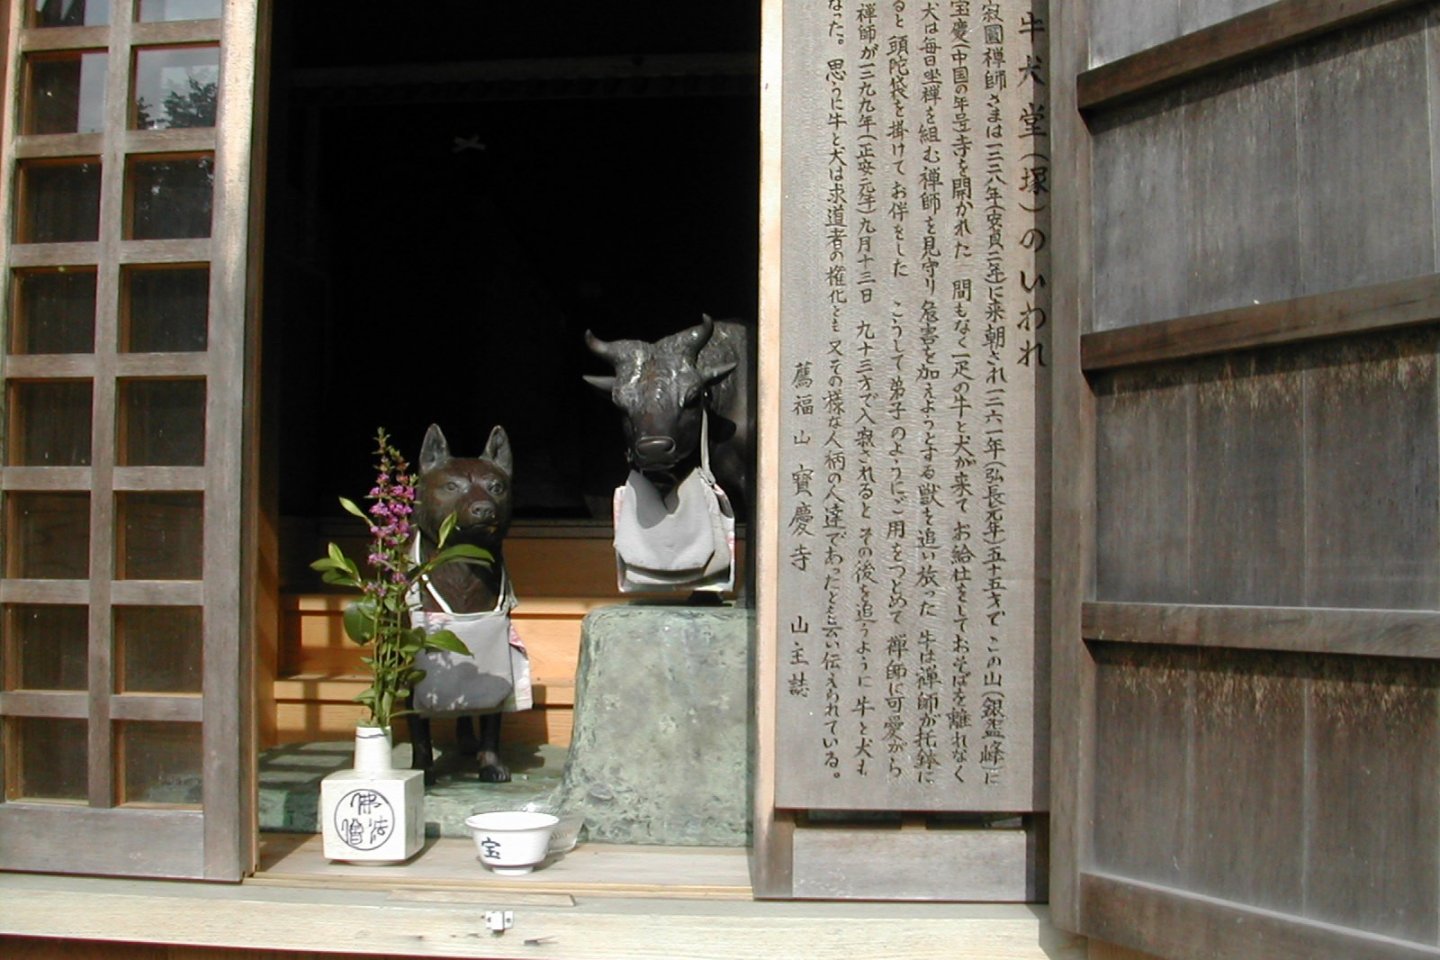 Gyu-ken Do (altar with cow and dog) at Hokyoji Temple